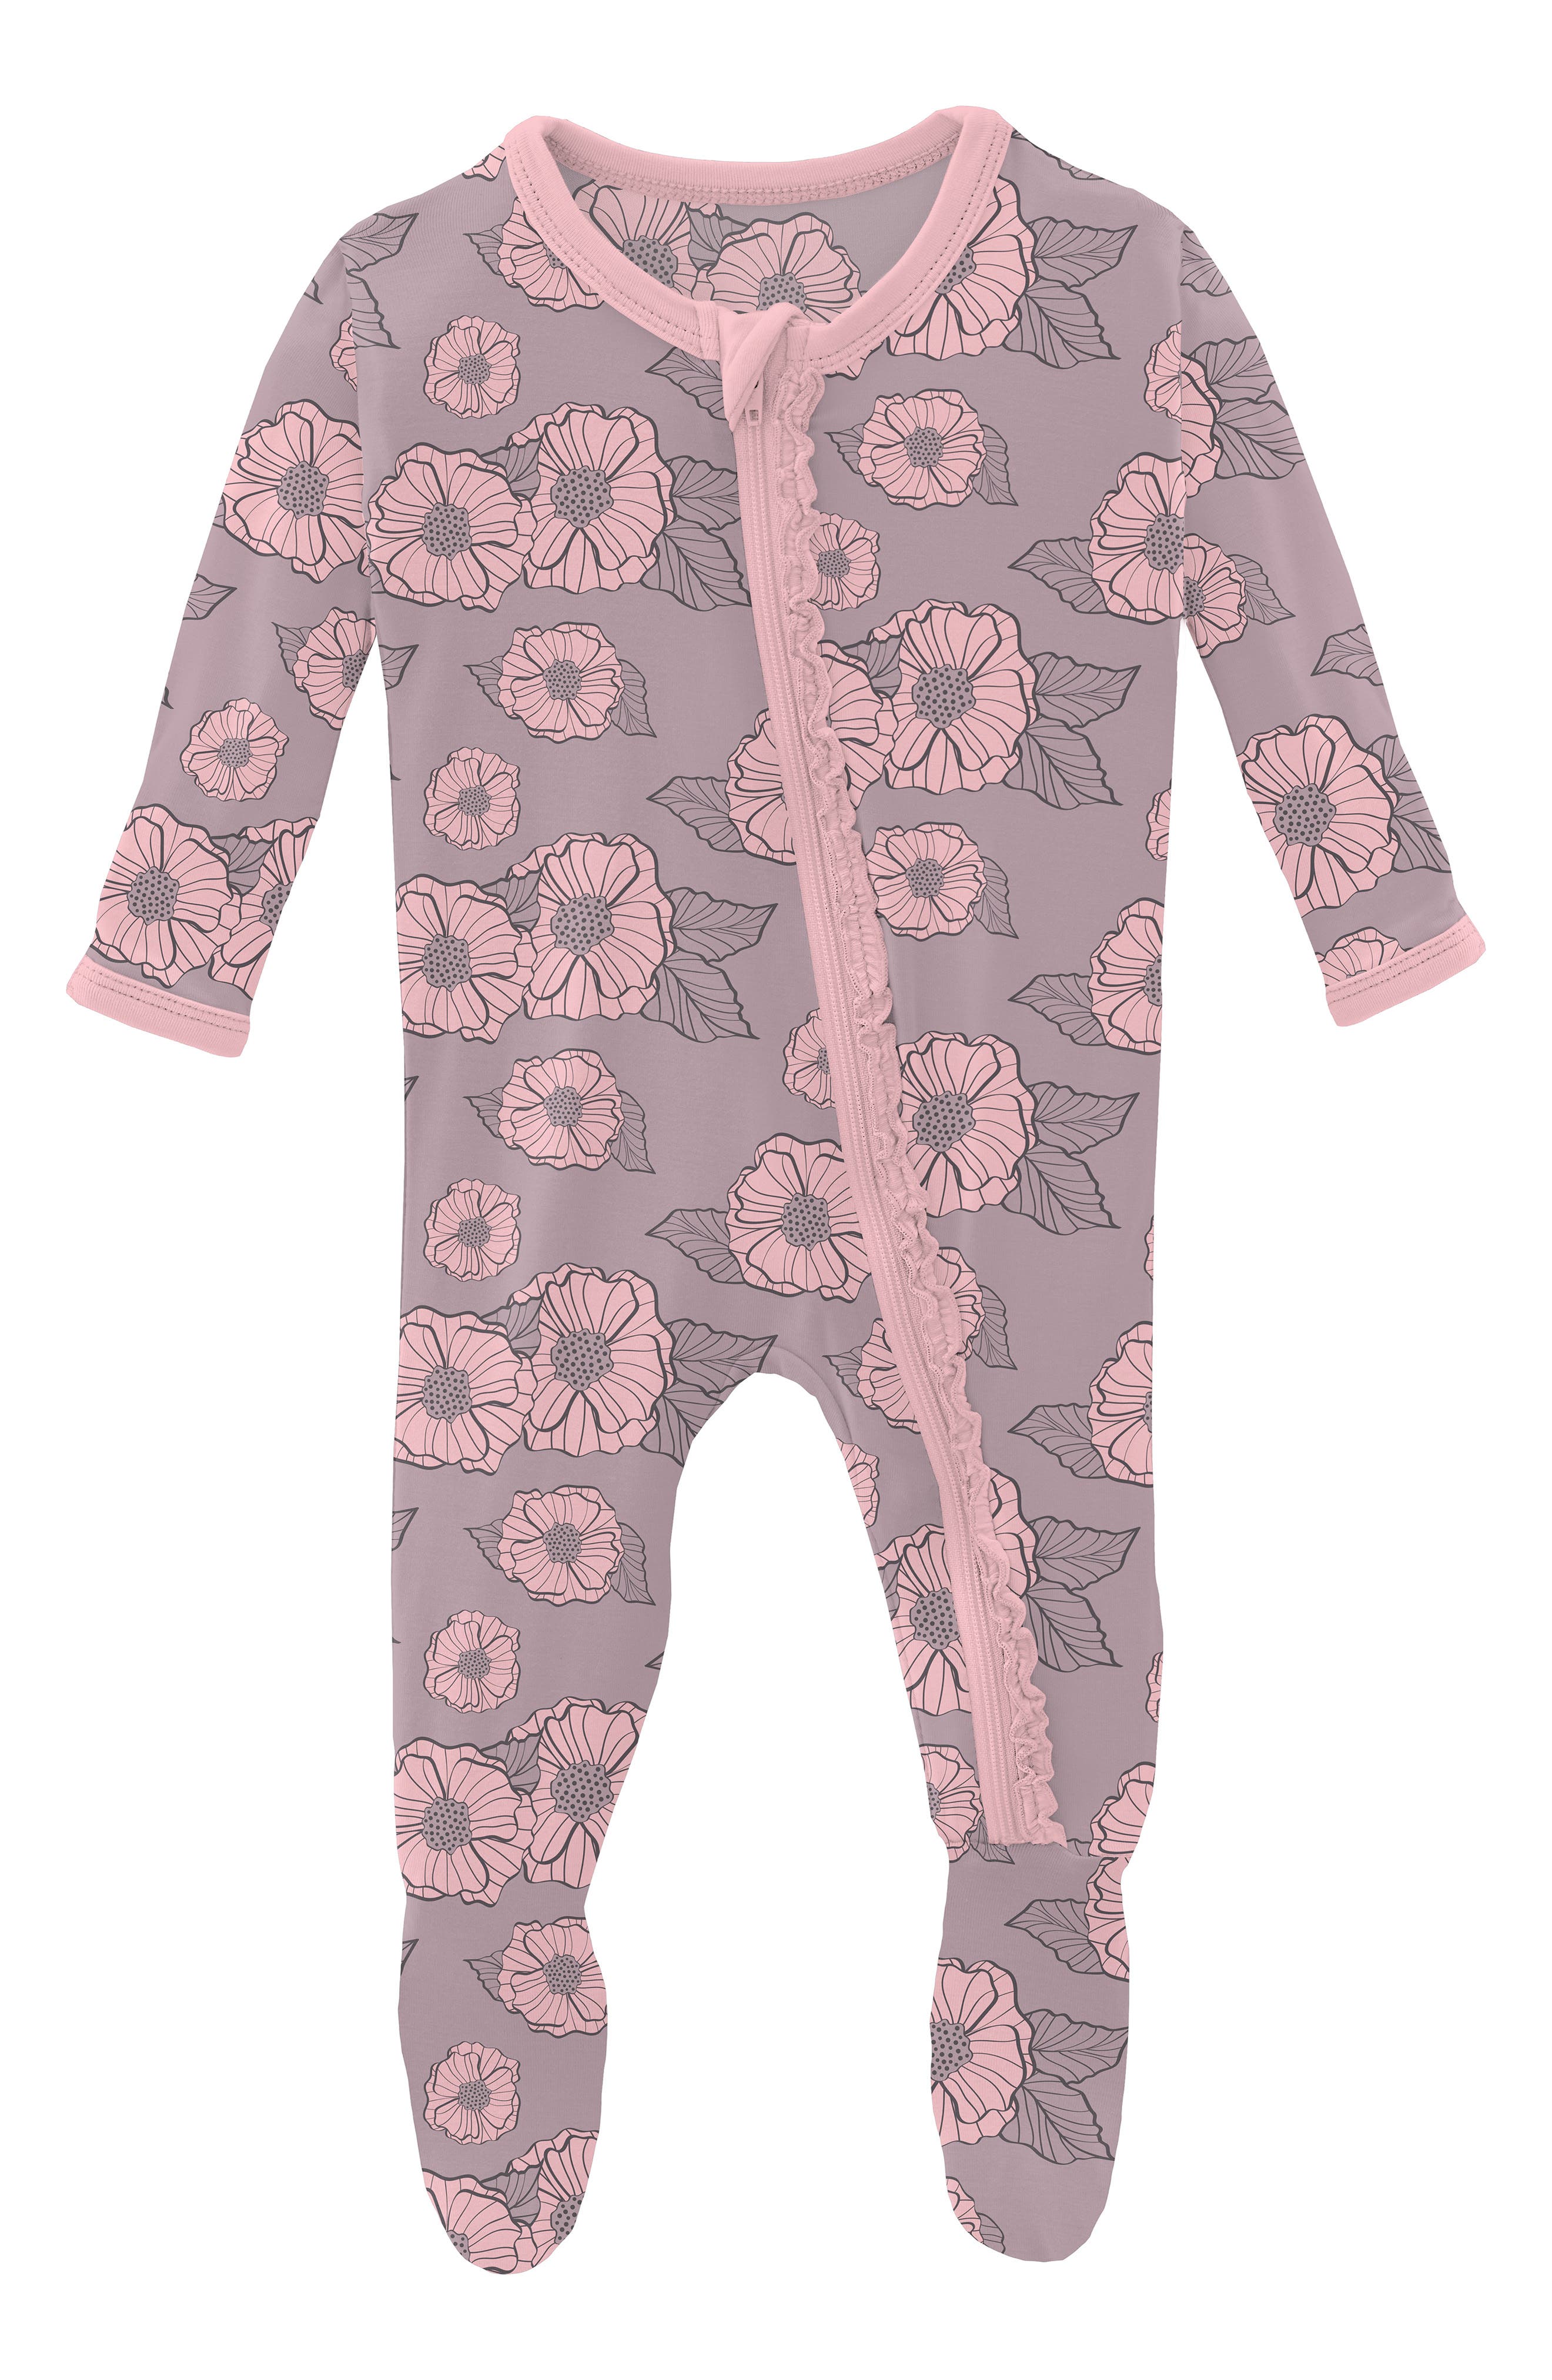 Nordstrom Baby Clothing Outfit Sets Bodysuits & All-In-Ones Muffin Ruffle Floral Print Footie in Natural Buds at Nordstrom 